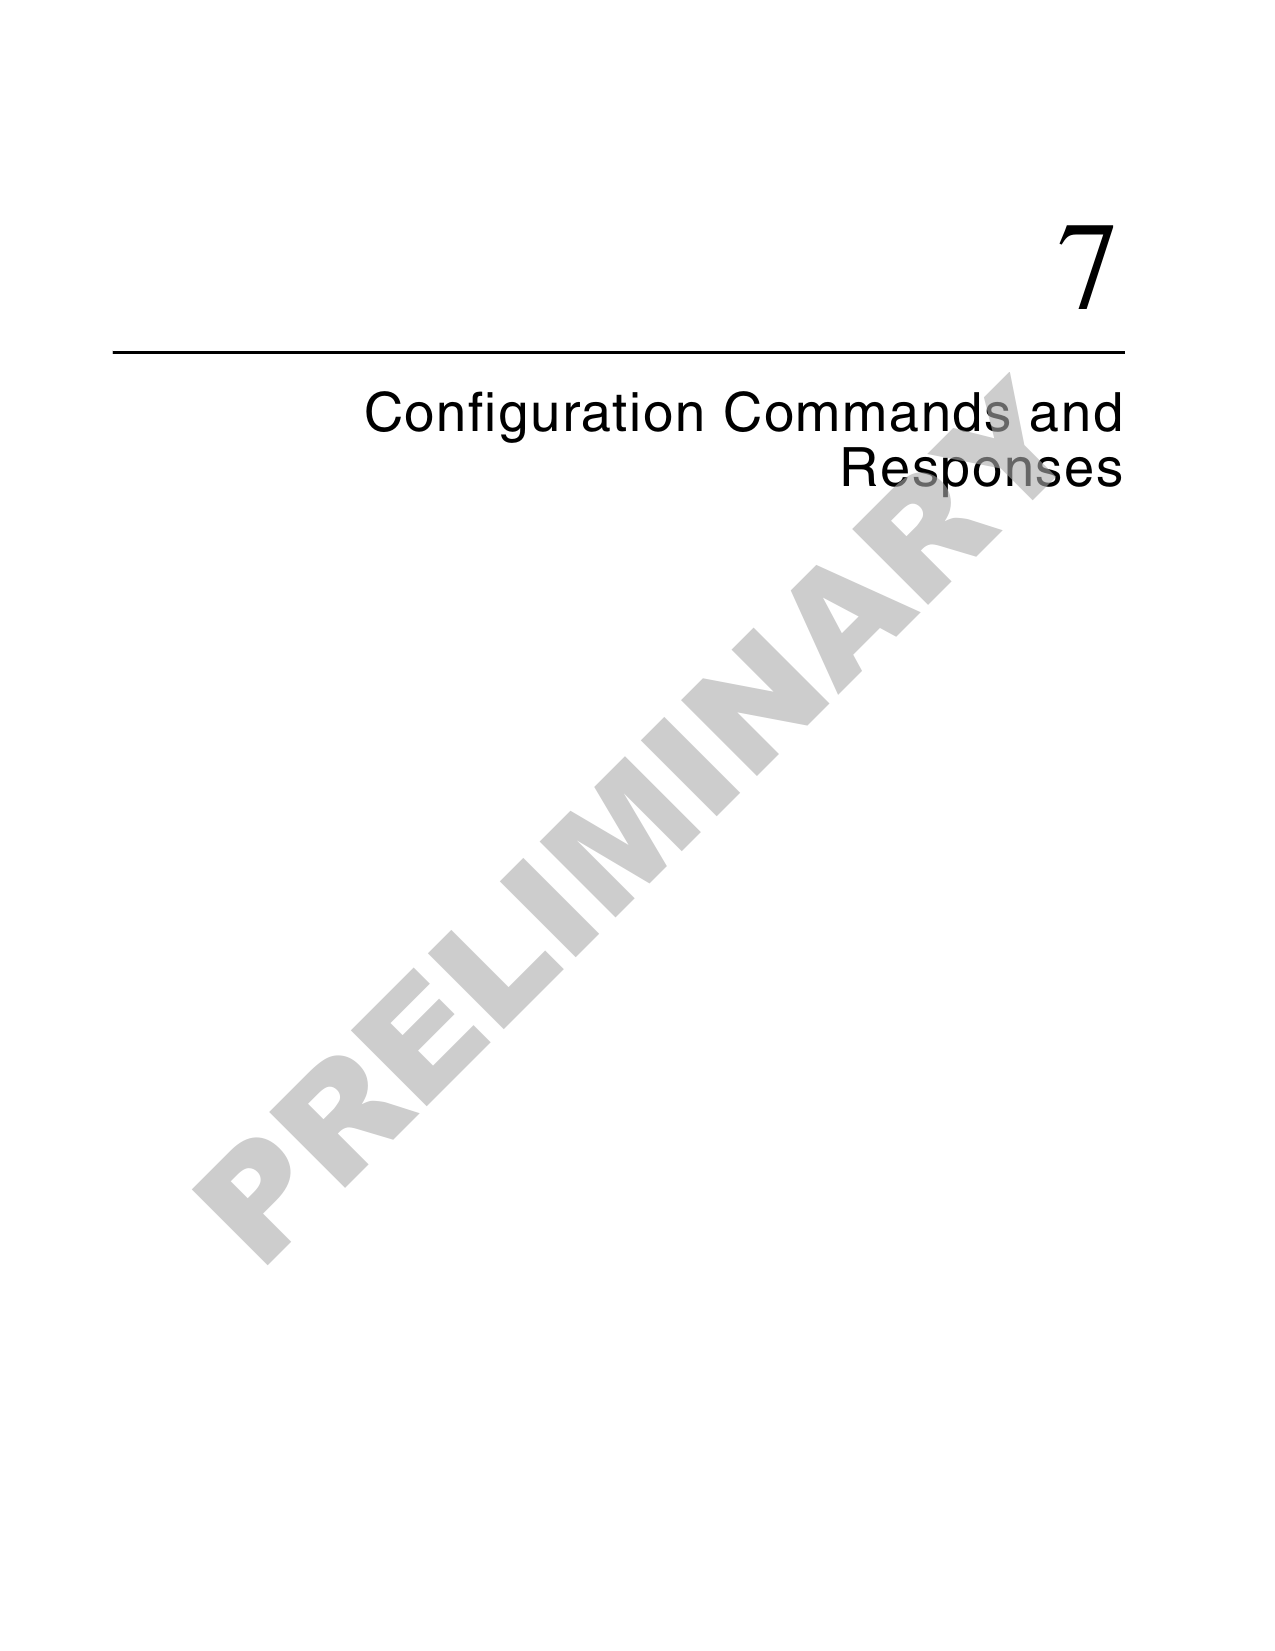 7Configuration Commands and ResponsesPRELIMINARY